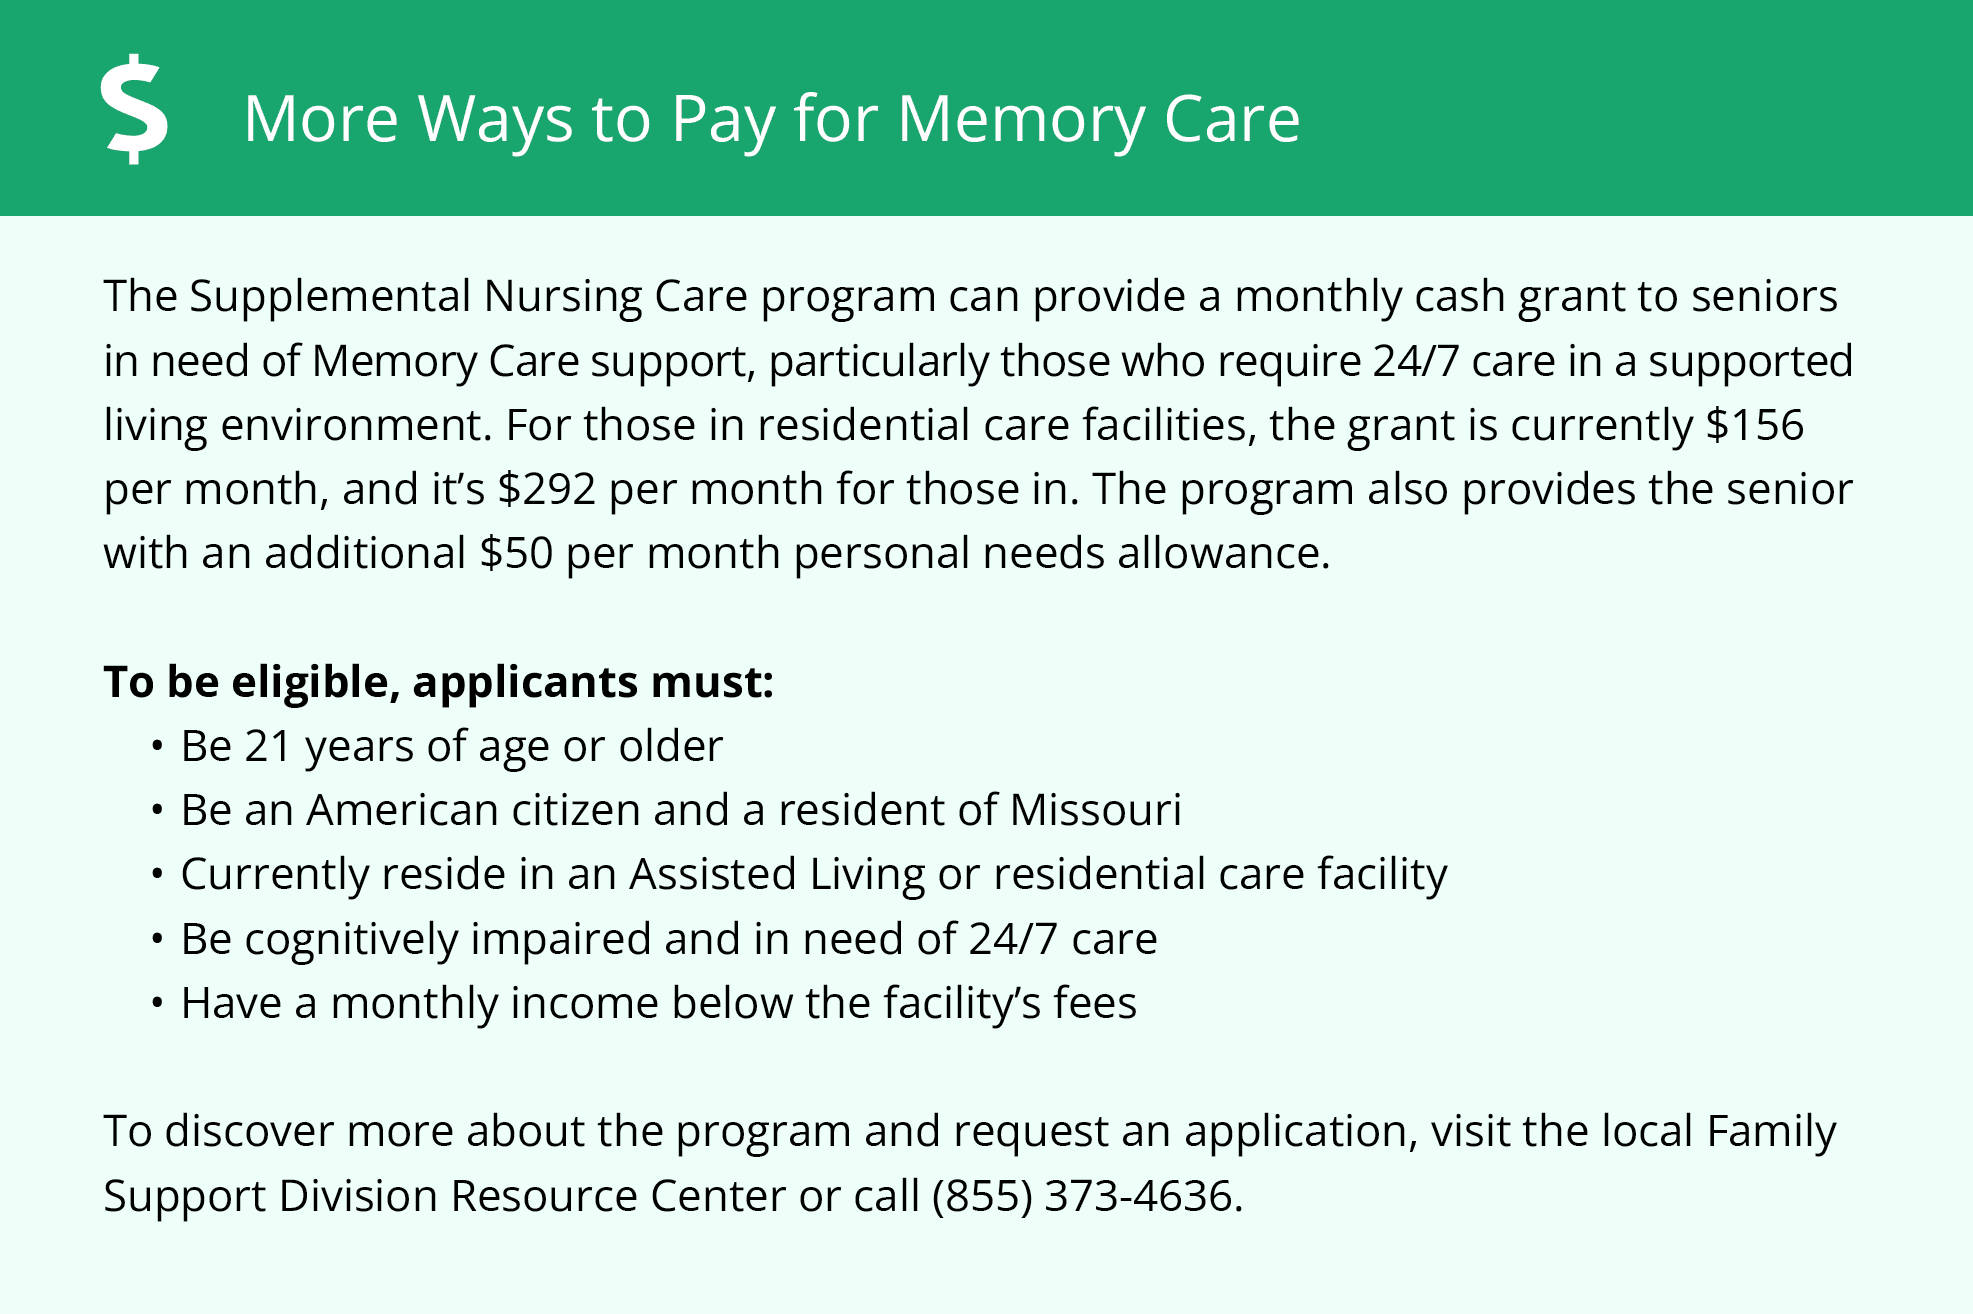 More Ways to Pay for Memory Care - Missouri